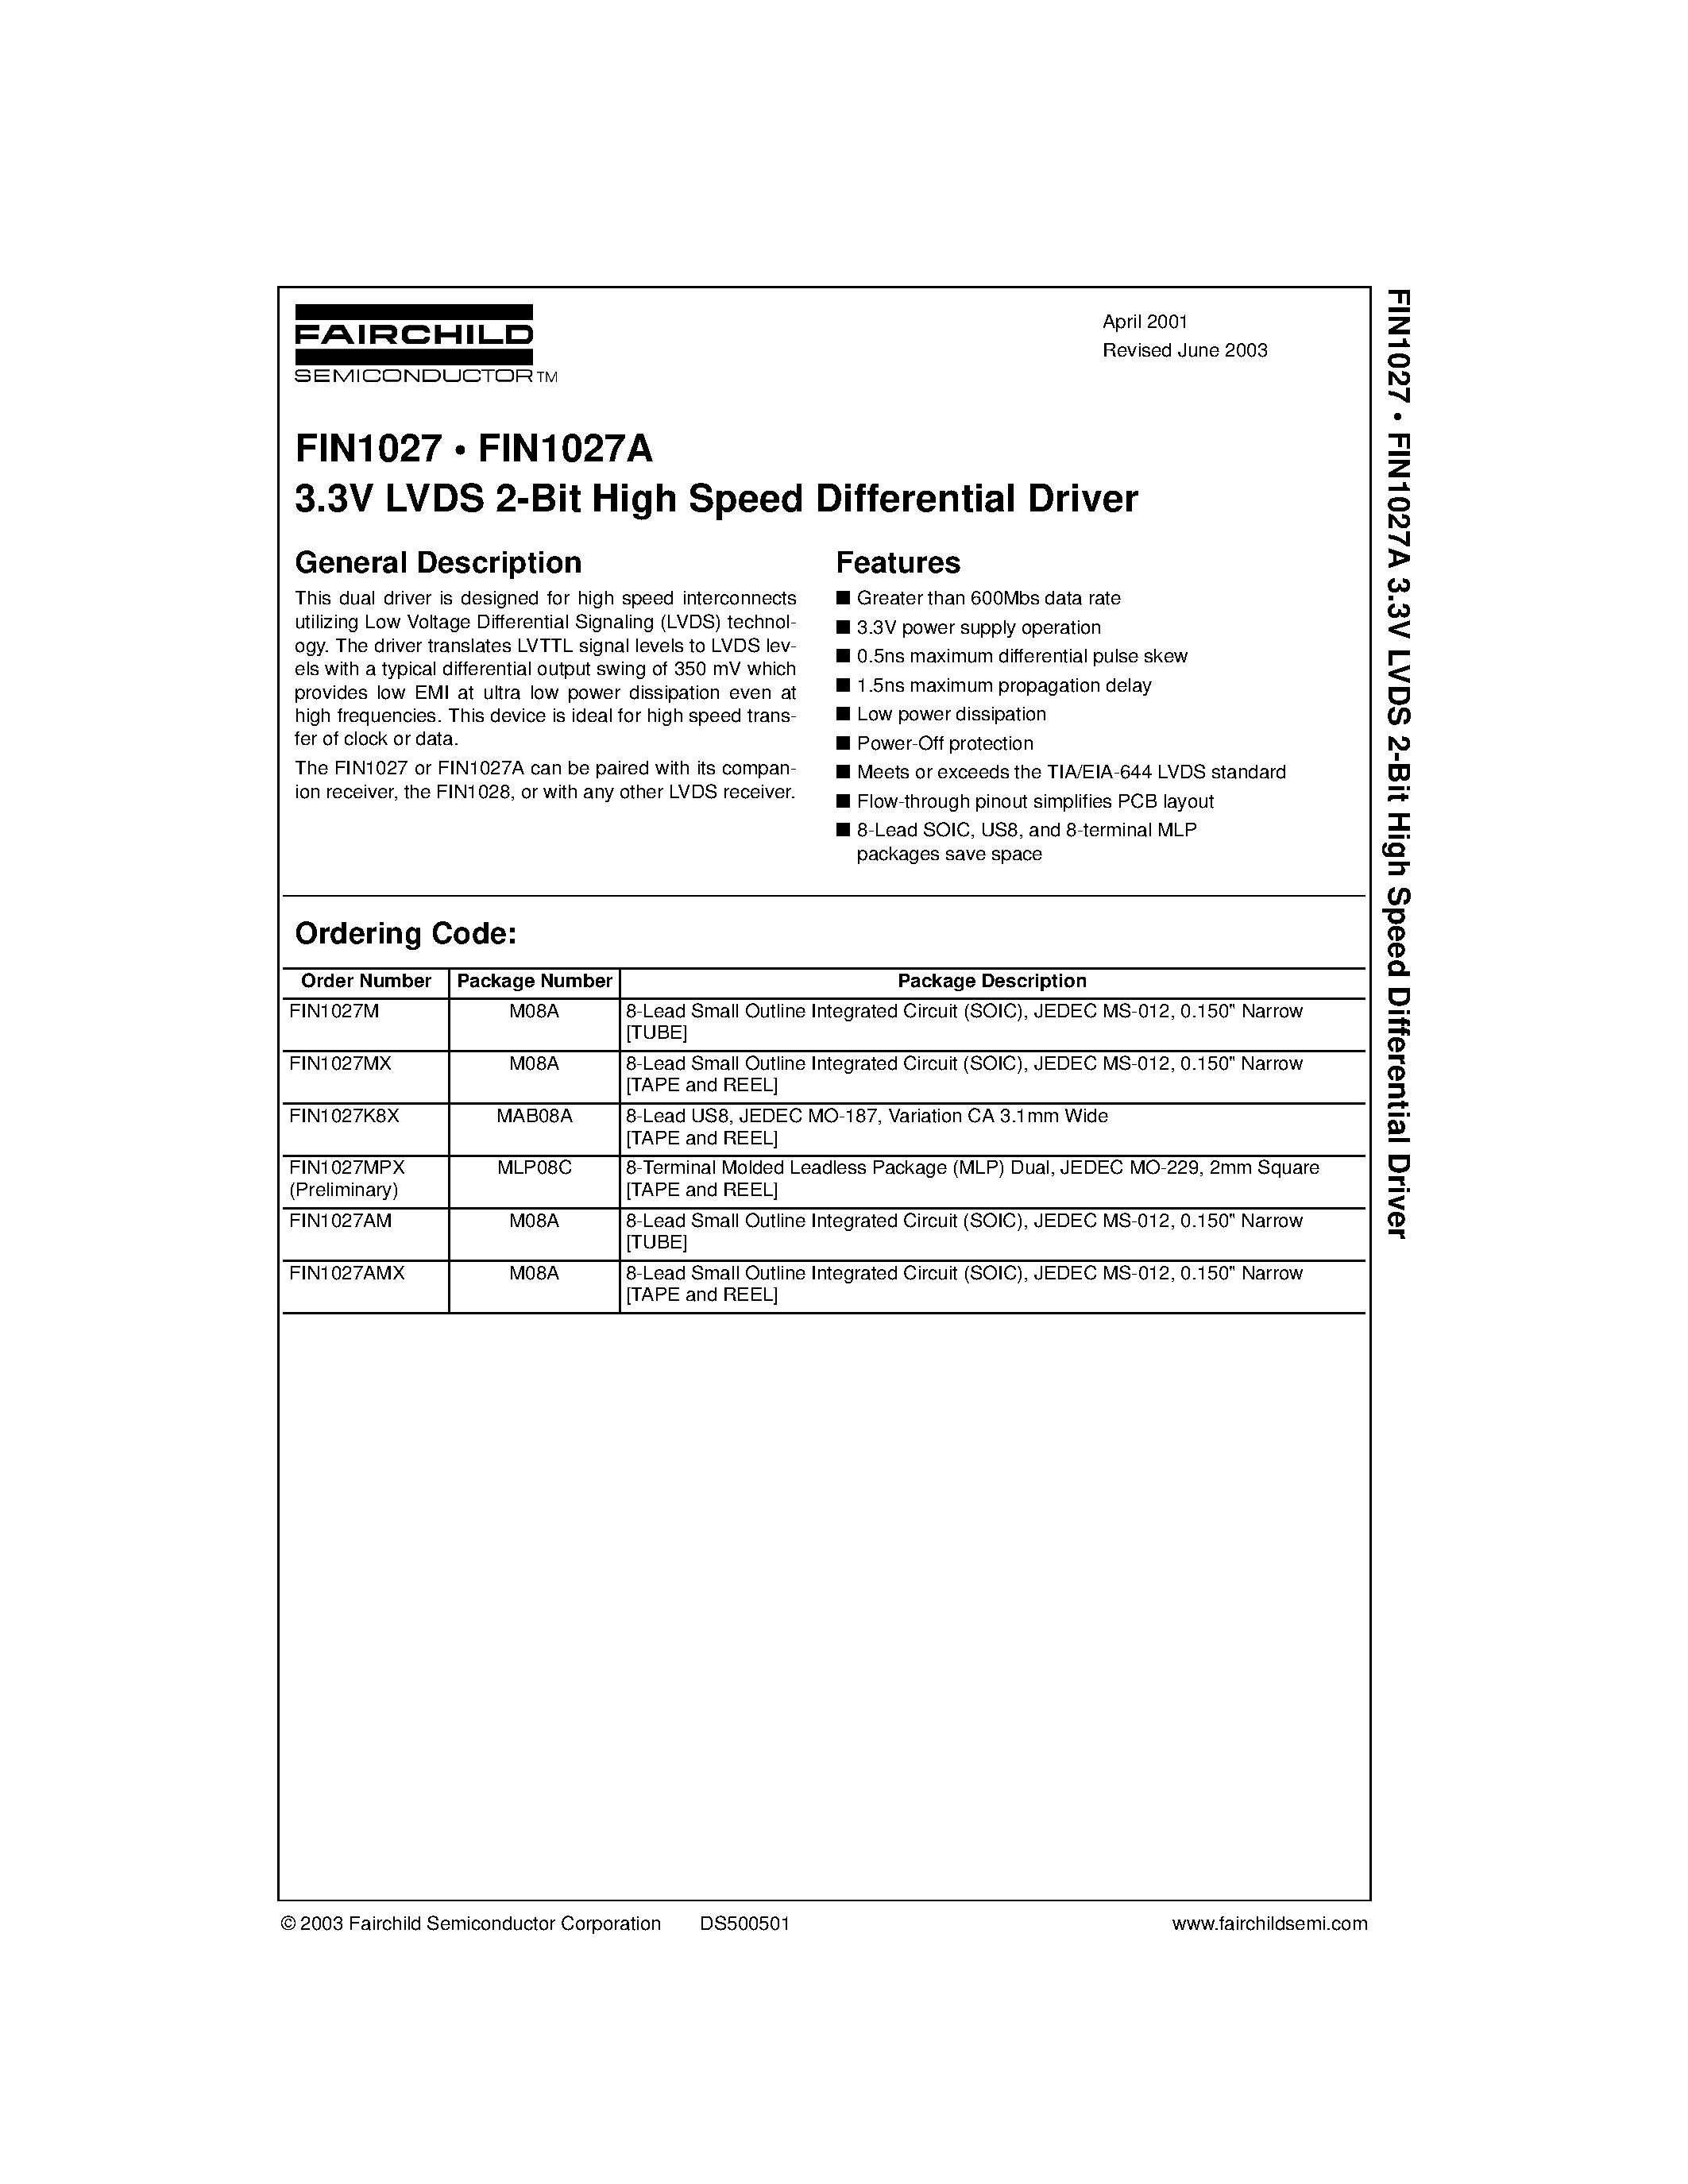 Datasheet FIN1027K8X - 3.3V LVDS 2-Bit High Speed Differential Driver page 1